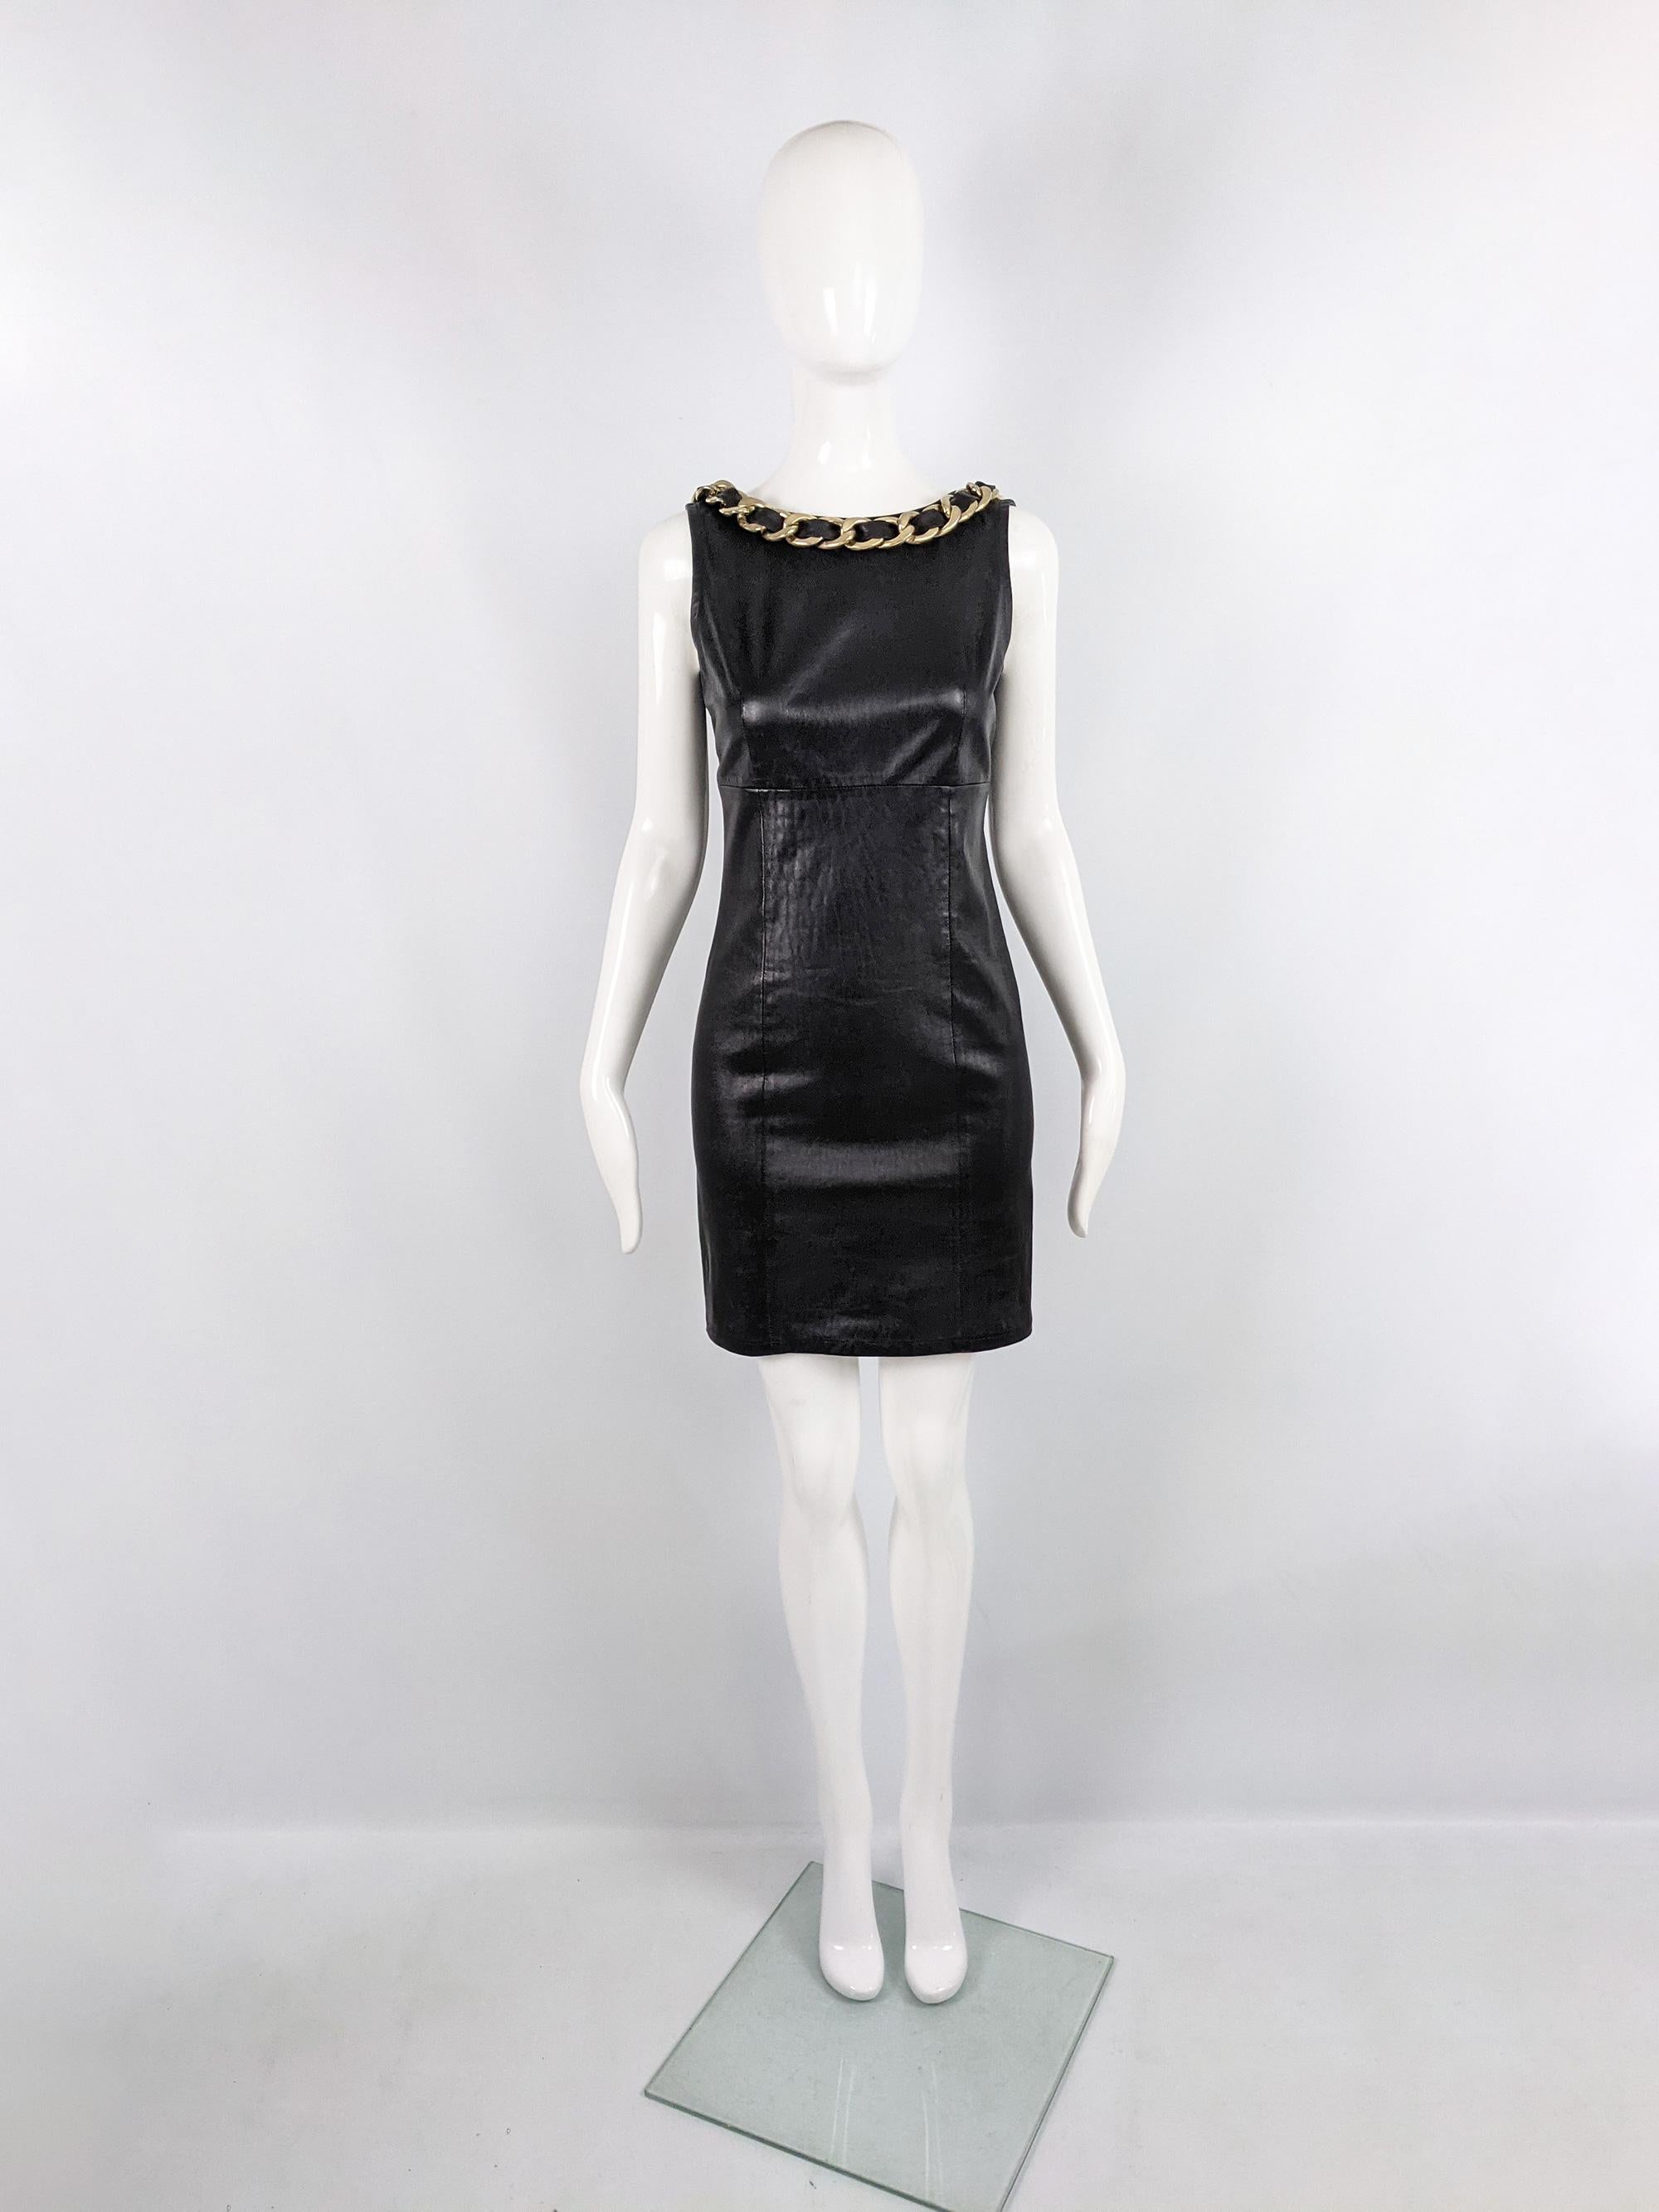 A sexy and glamorous preowned Philipp Plein sleeveless mini cocktail dress. Made in Italy, in a black leather with a heavy gold coloured chain with leather interlaced though it. With a deep backless design, perfect for a party. 

Size: Marked M and